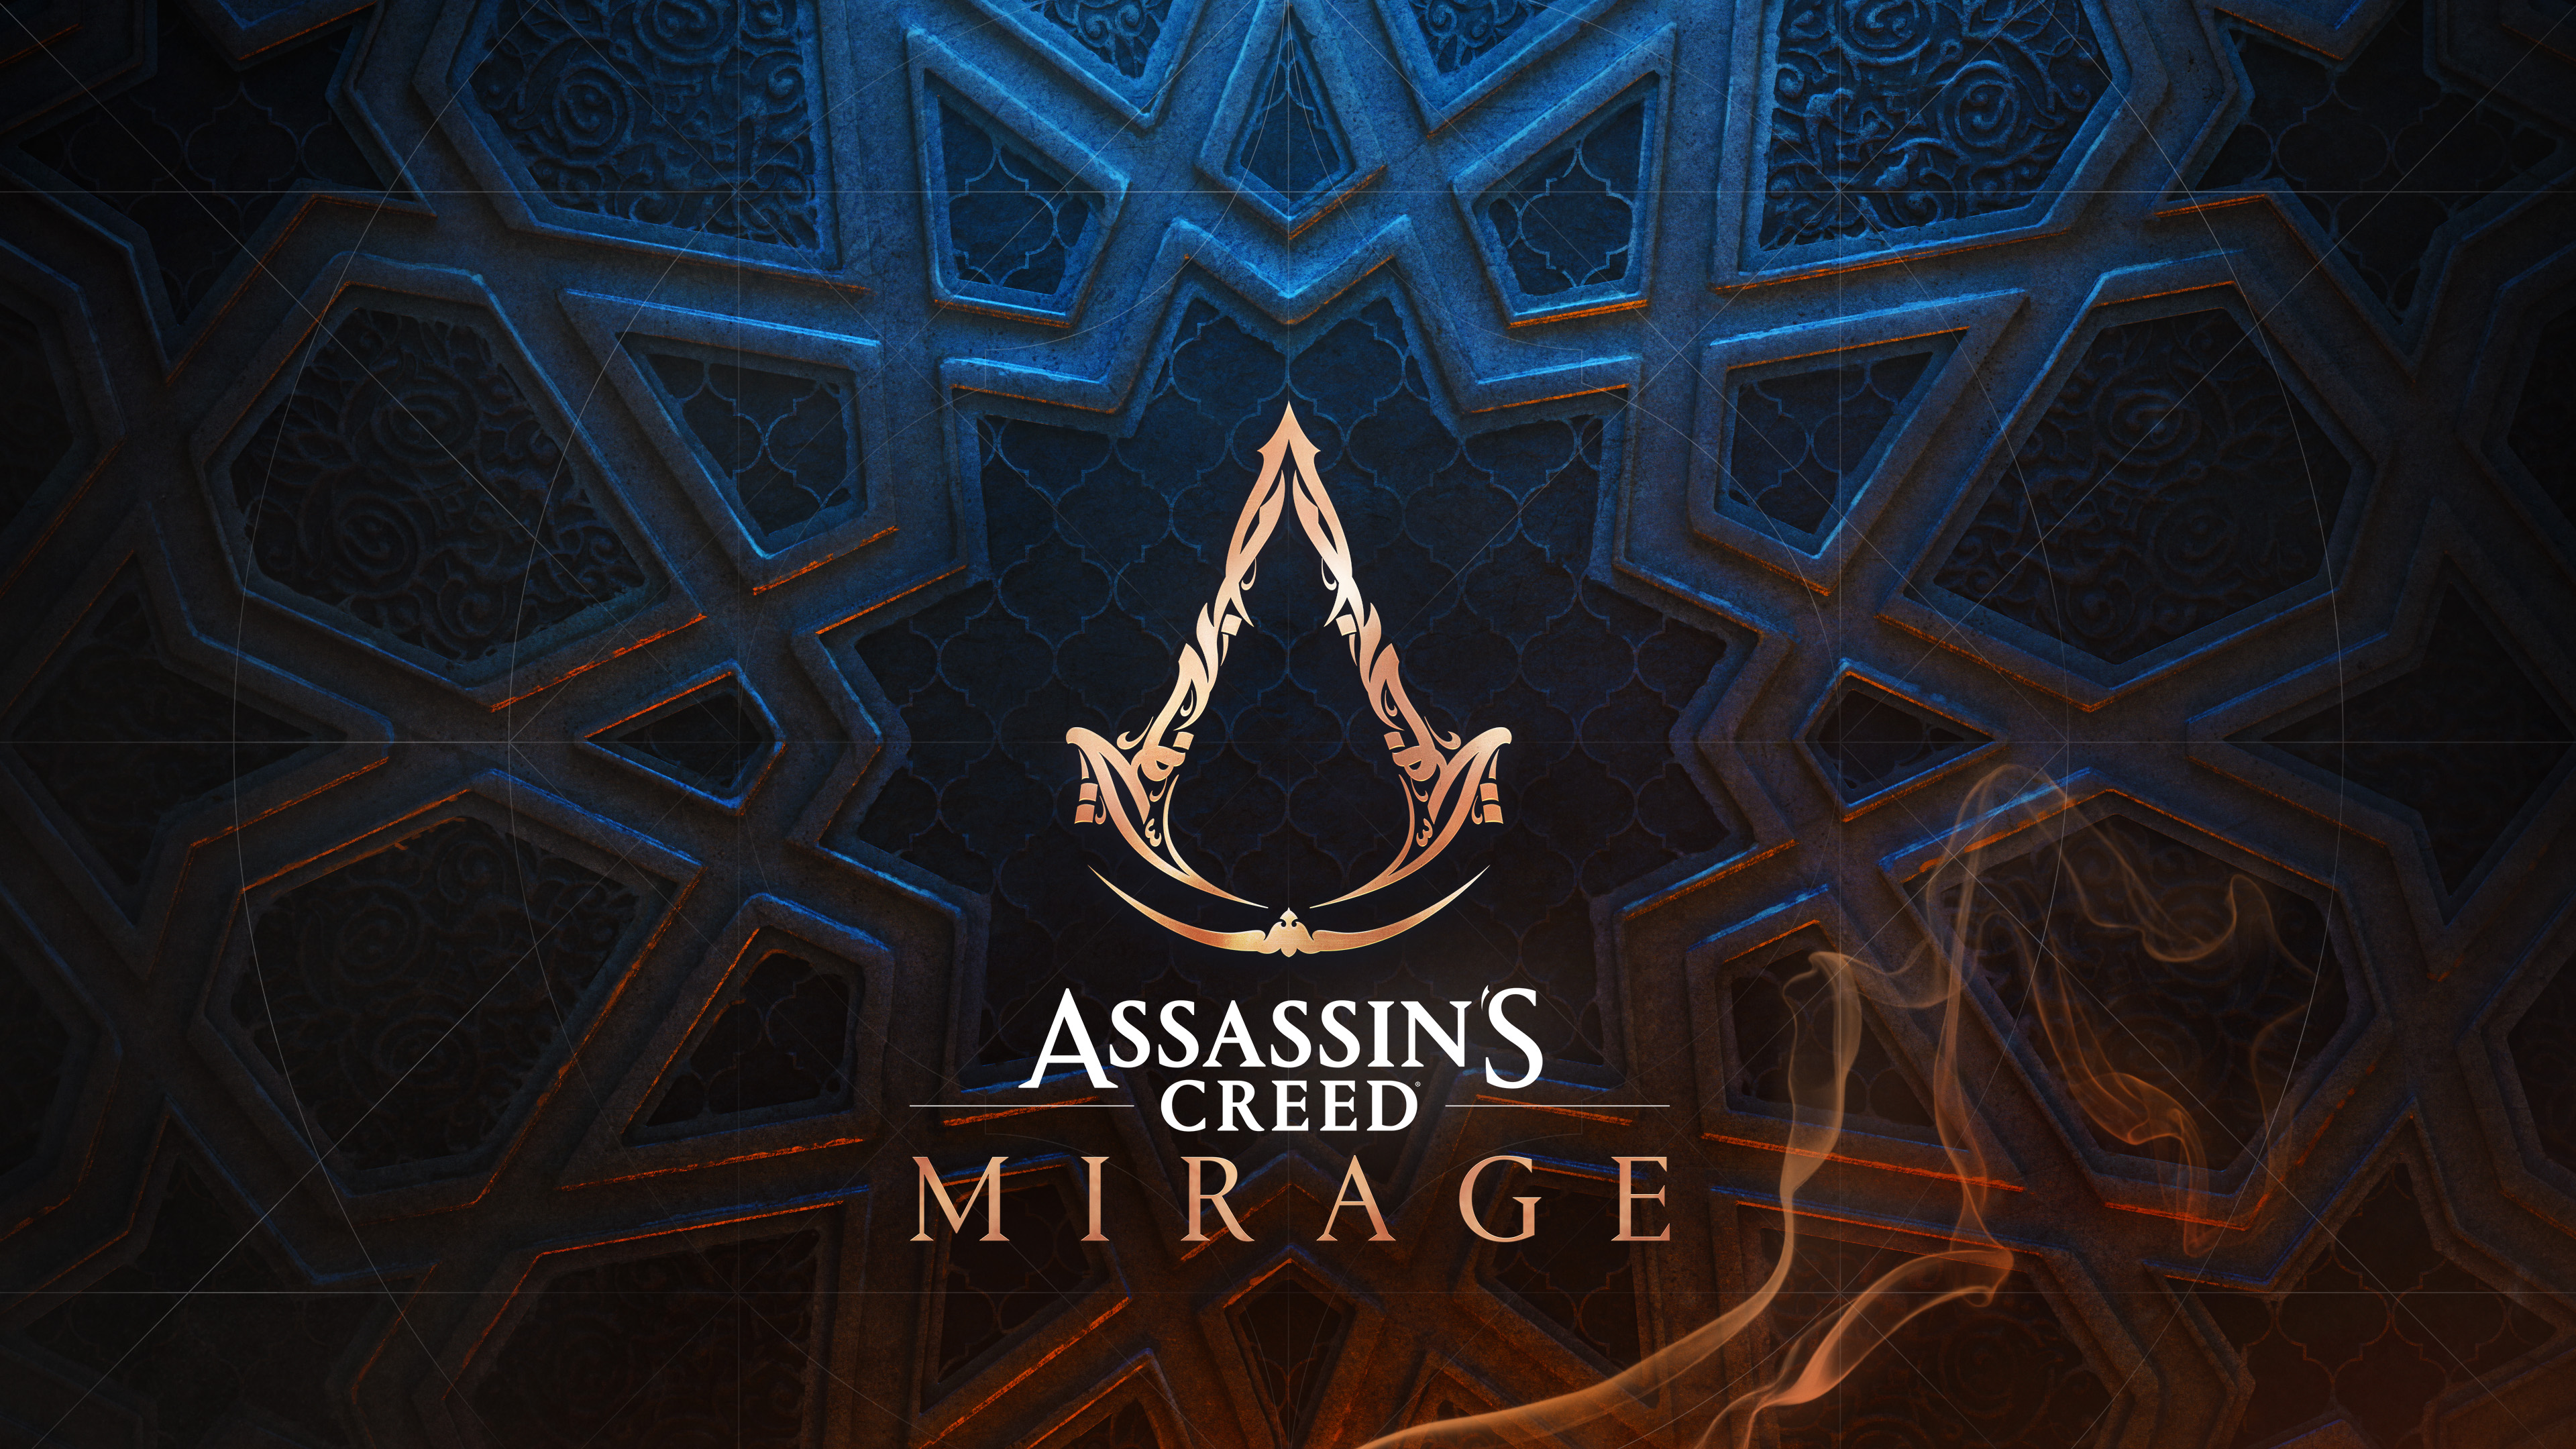 Video Game Assassin's Creed Mirage HD Wallpaper | Background Image